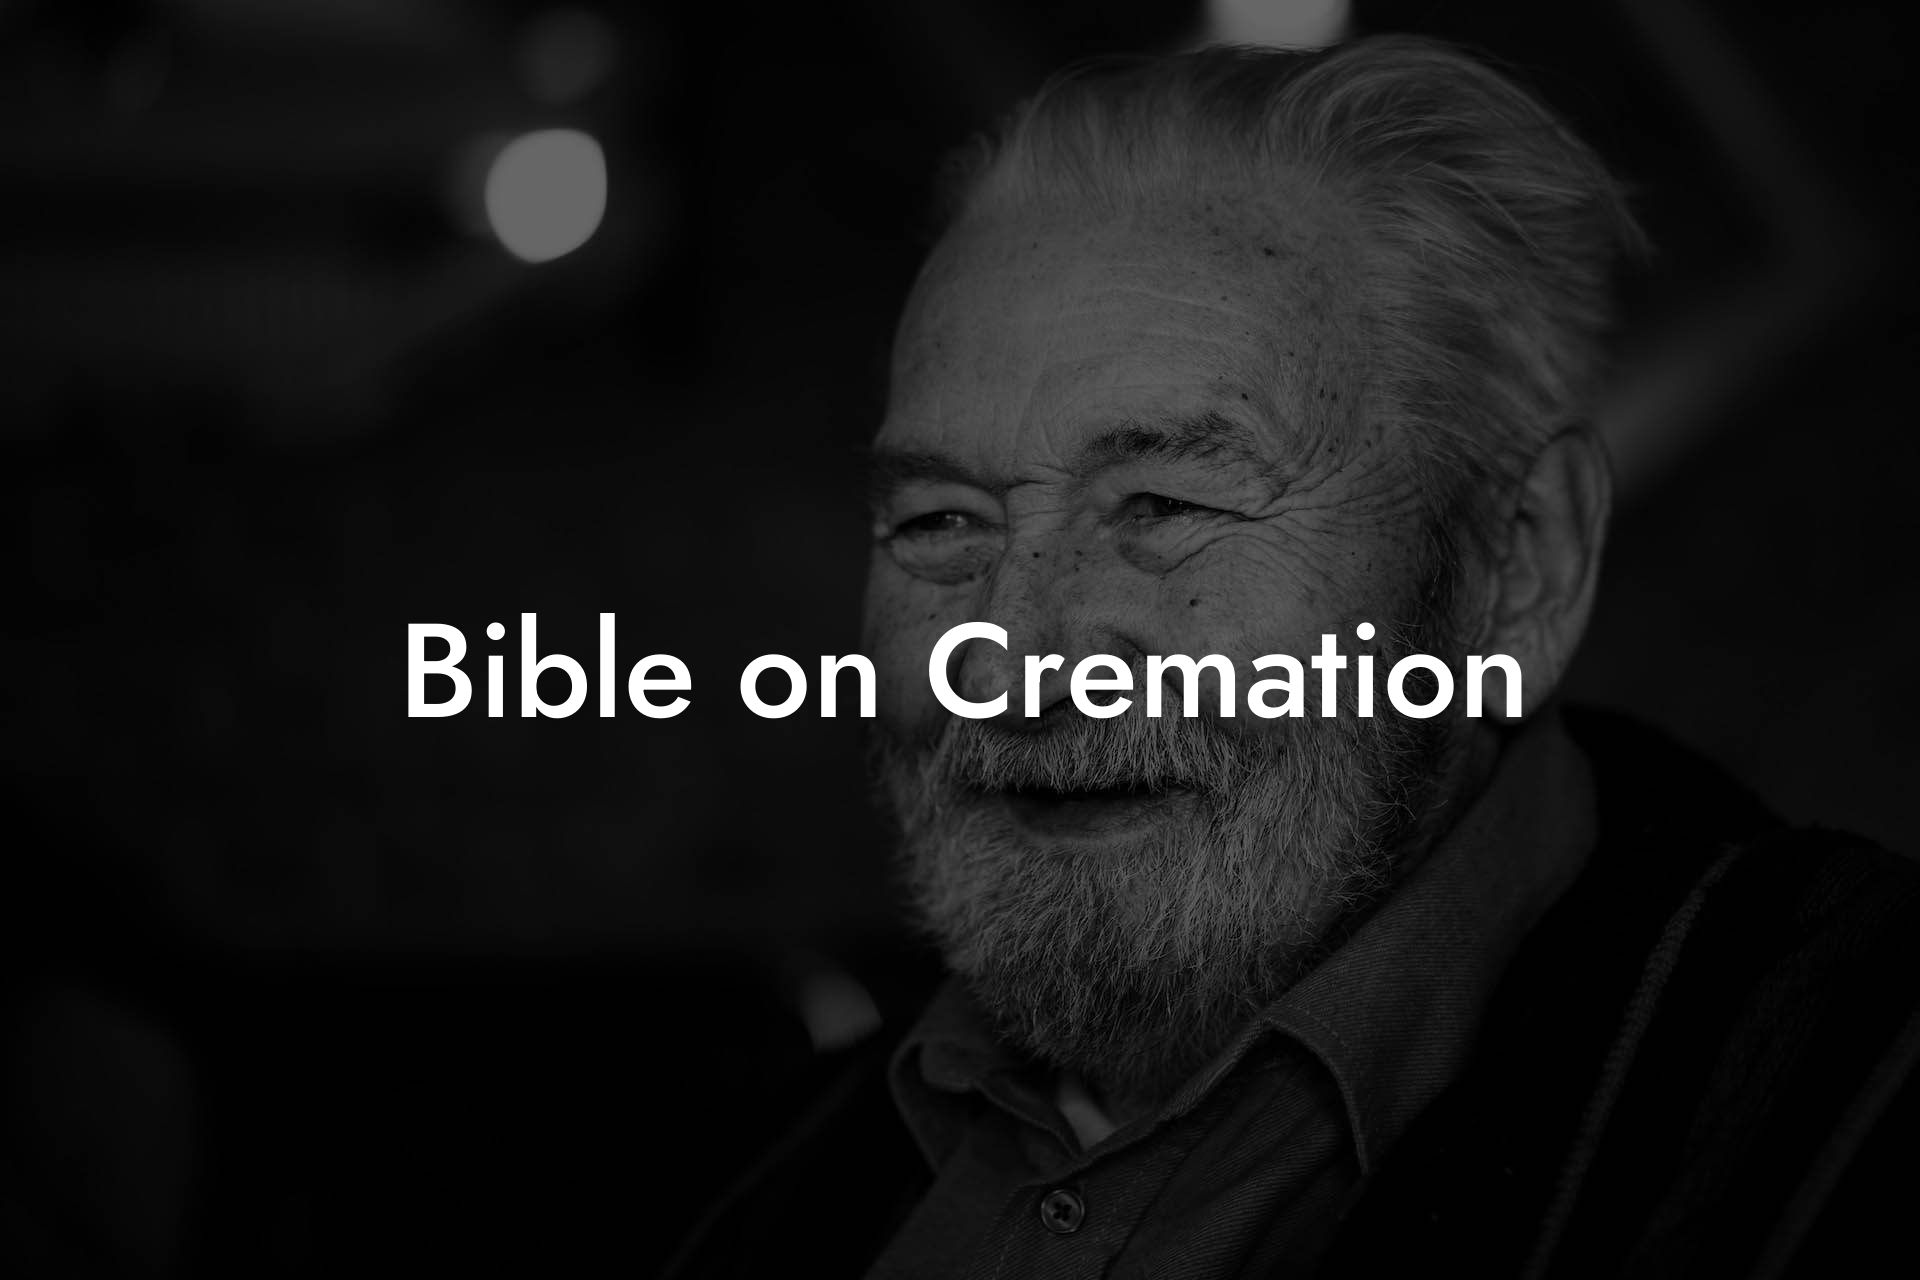 Bible on Cremation